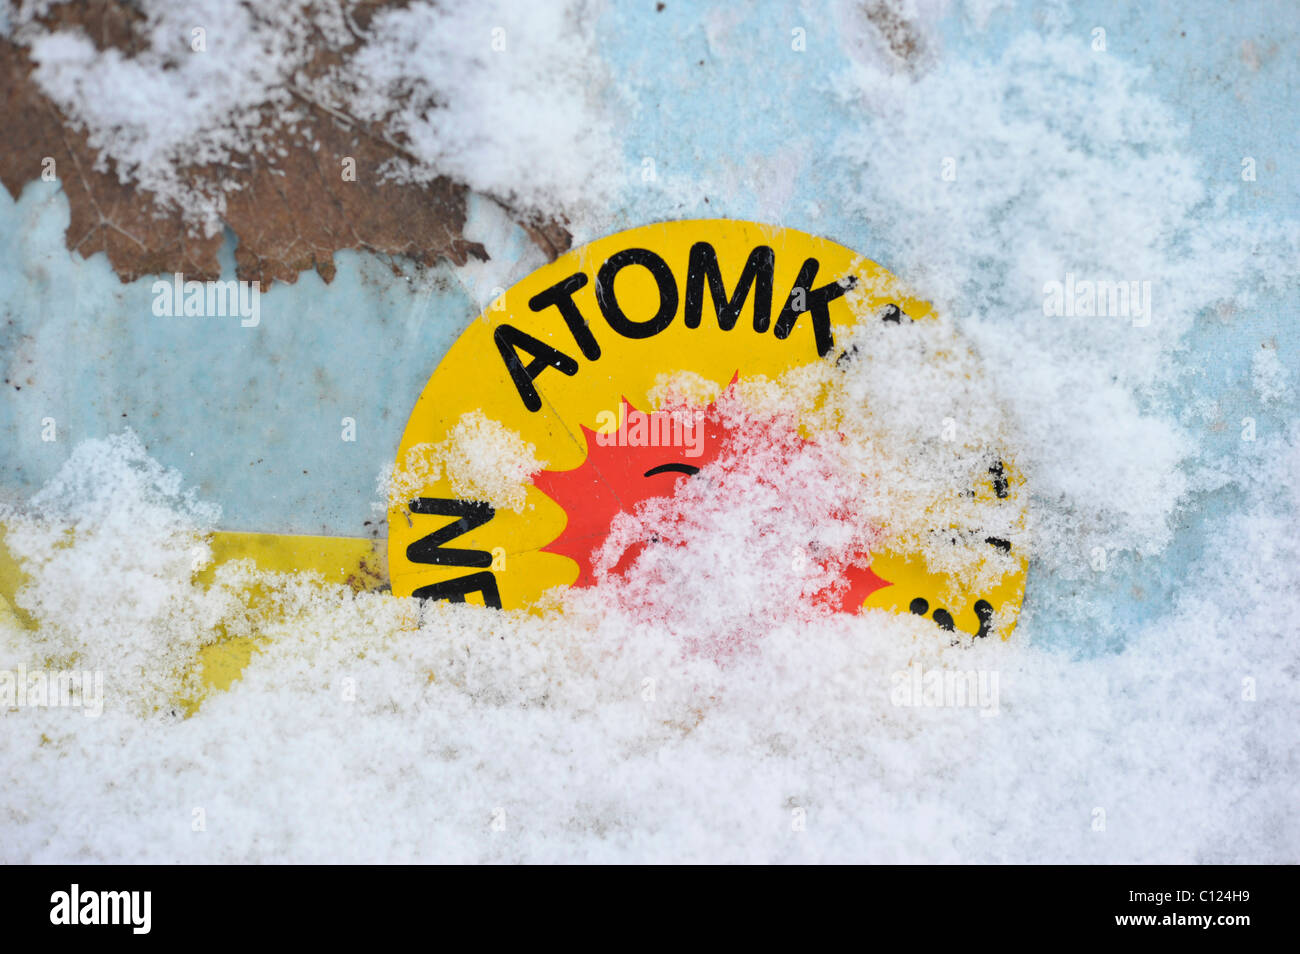 Snow-covered sticker, 'Atomkraft, Nein Danke' nuclear power No thanks Stock Photo